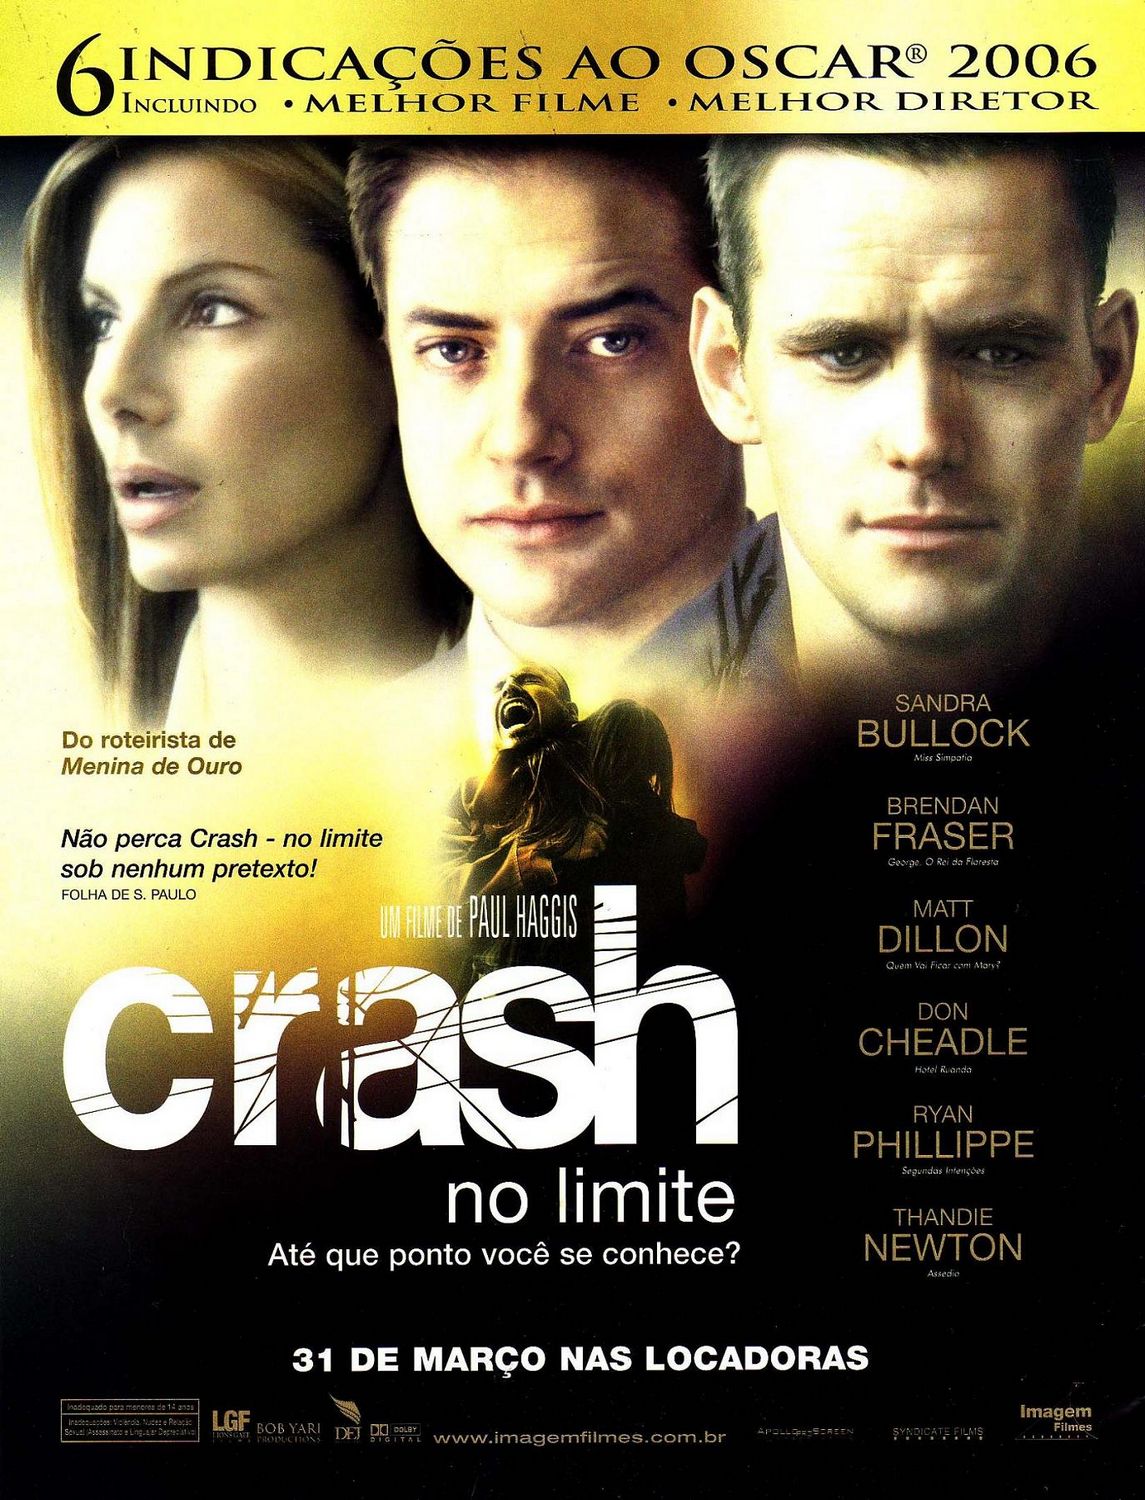 Extra Large Movie Poster Image for Crash (#7 of 8)